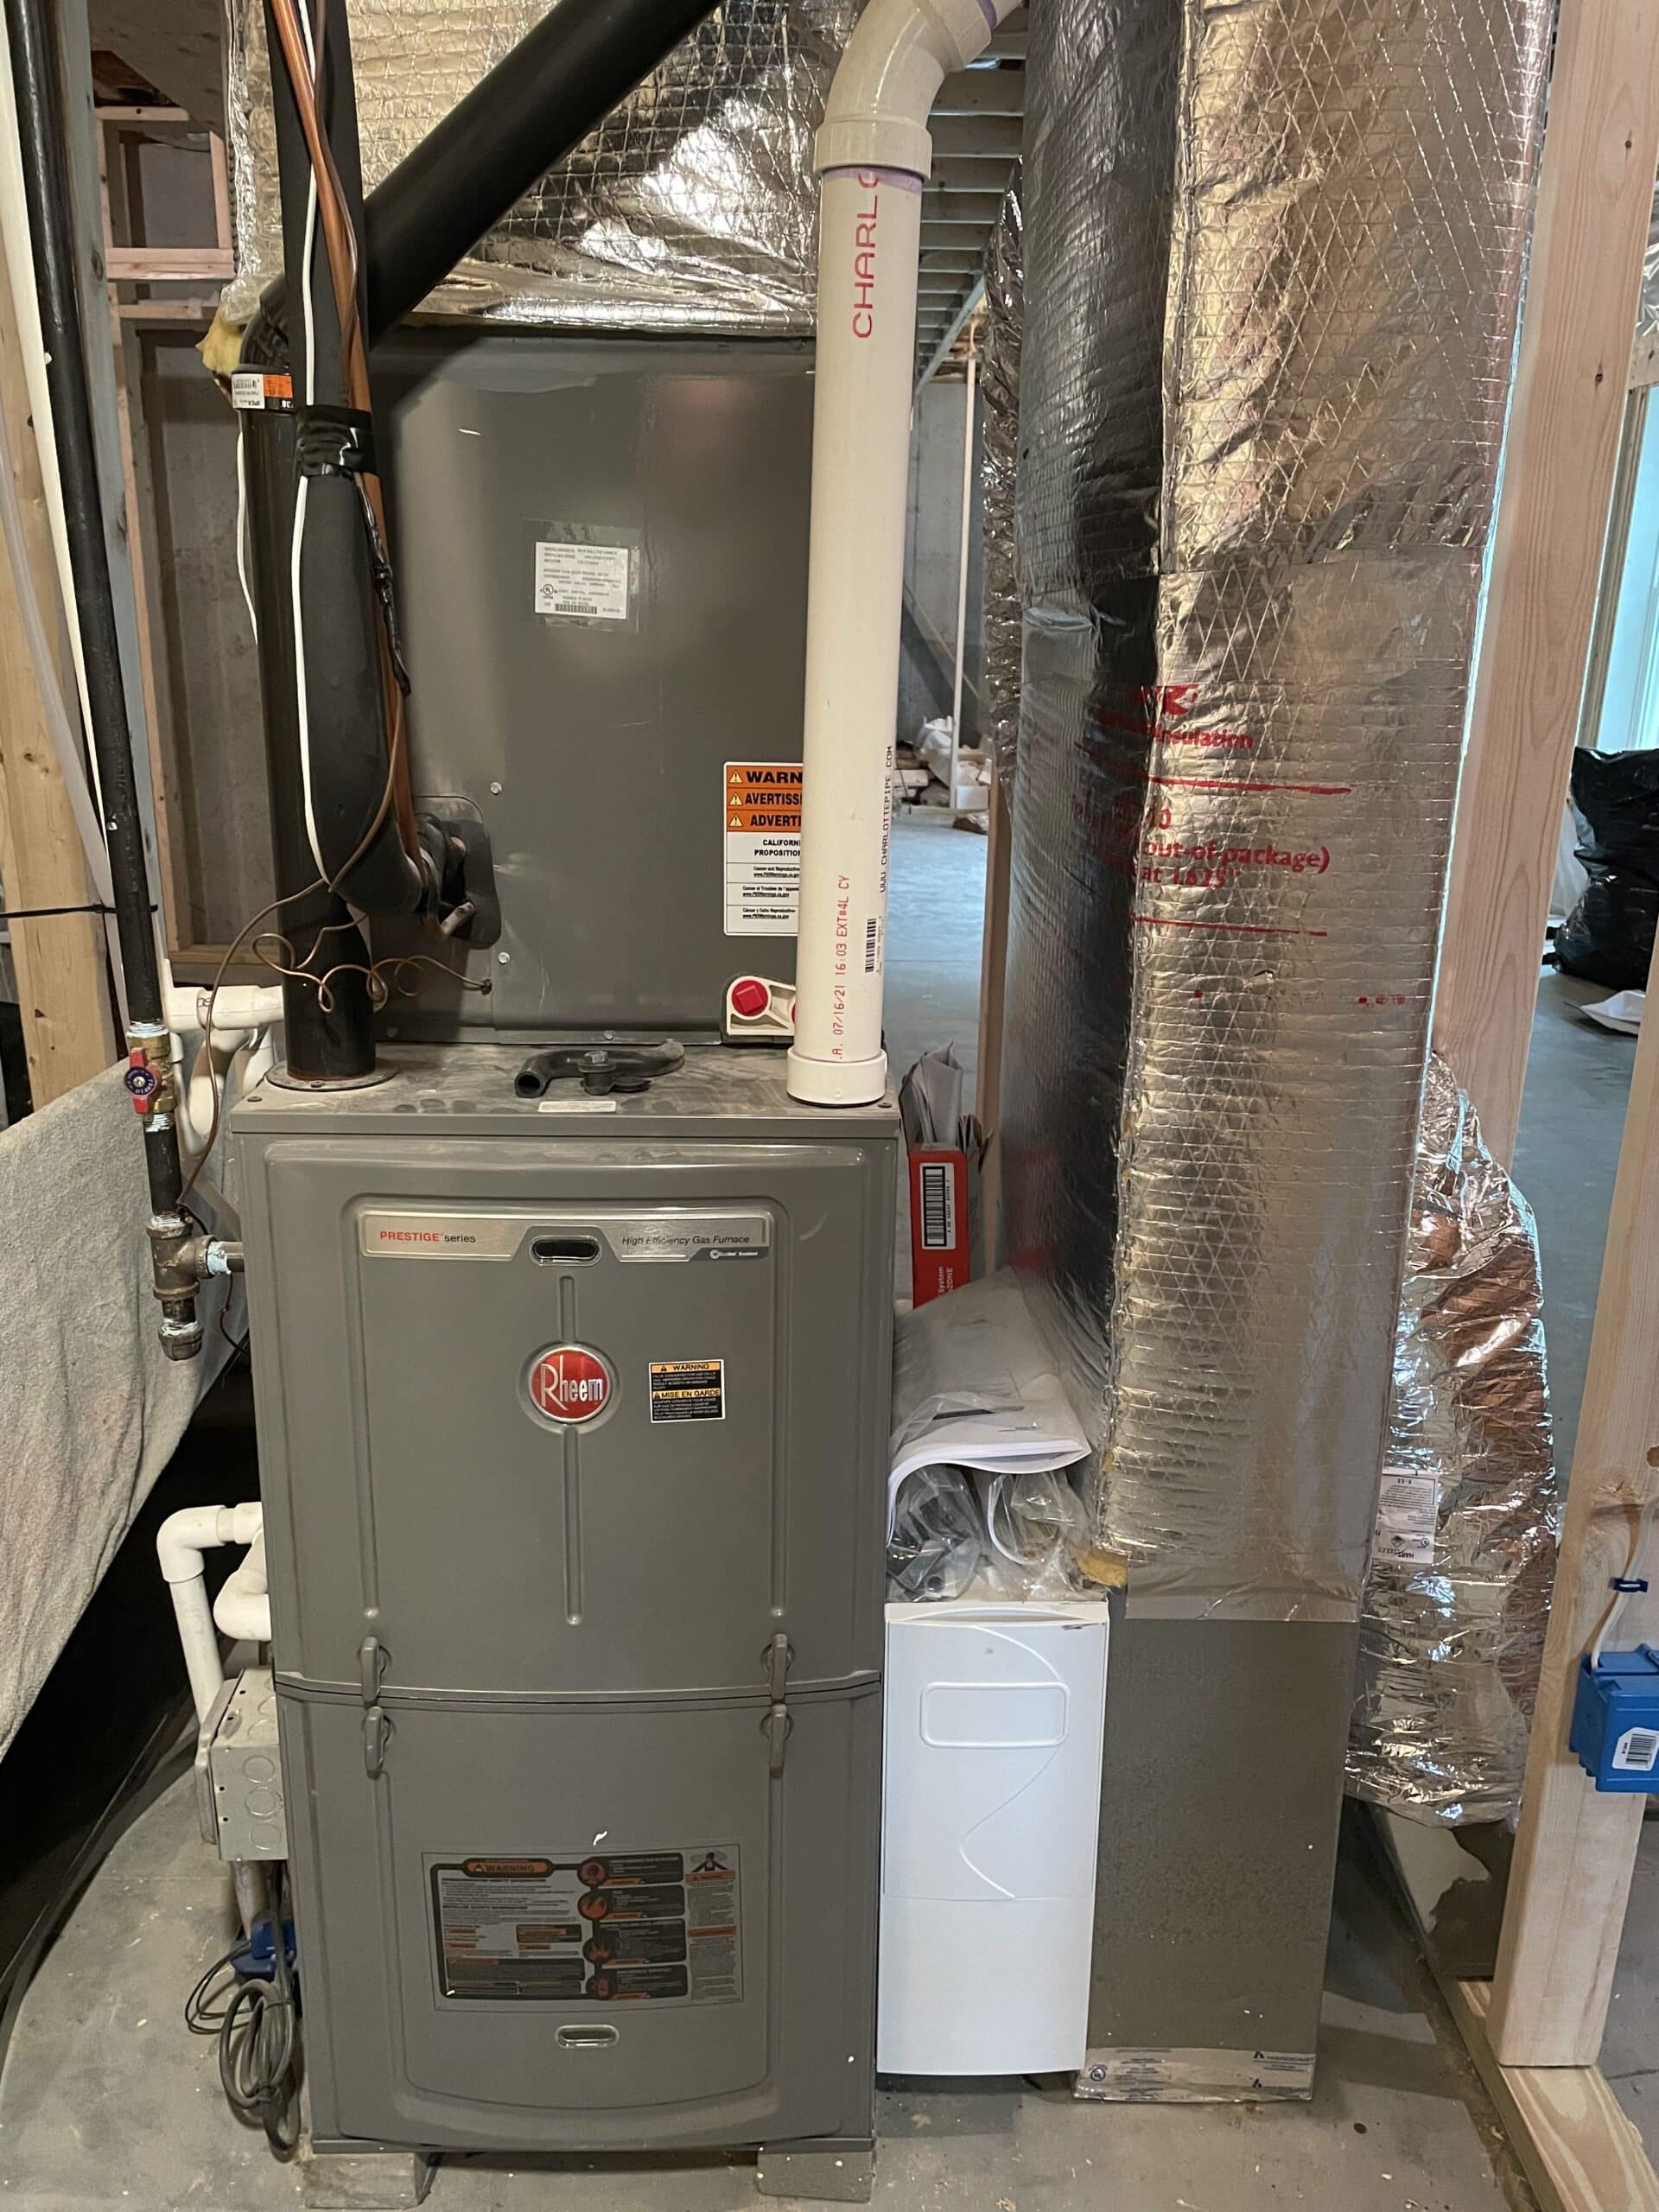 Hot water heater and furnace in basement